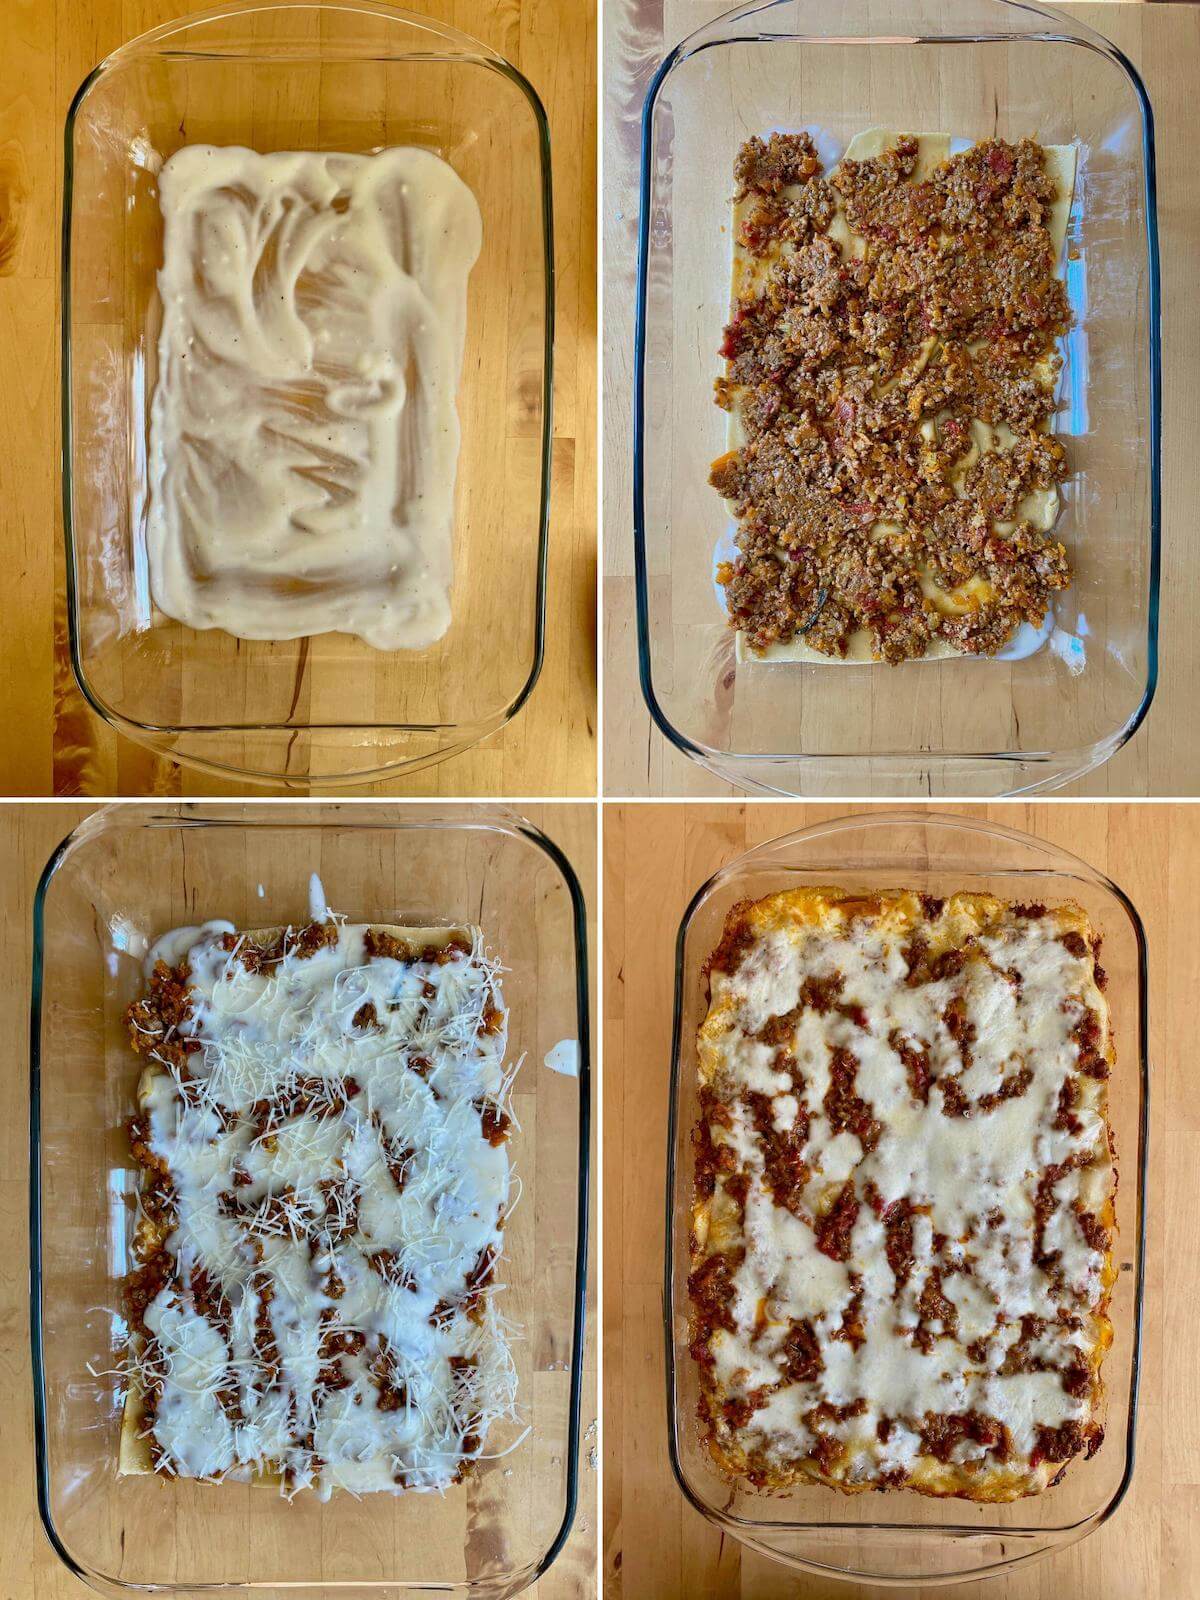 A grid of 4 images showing how to assemble the lasagna al forno.